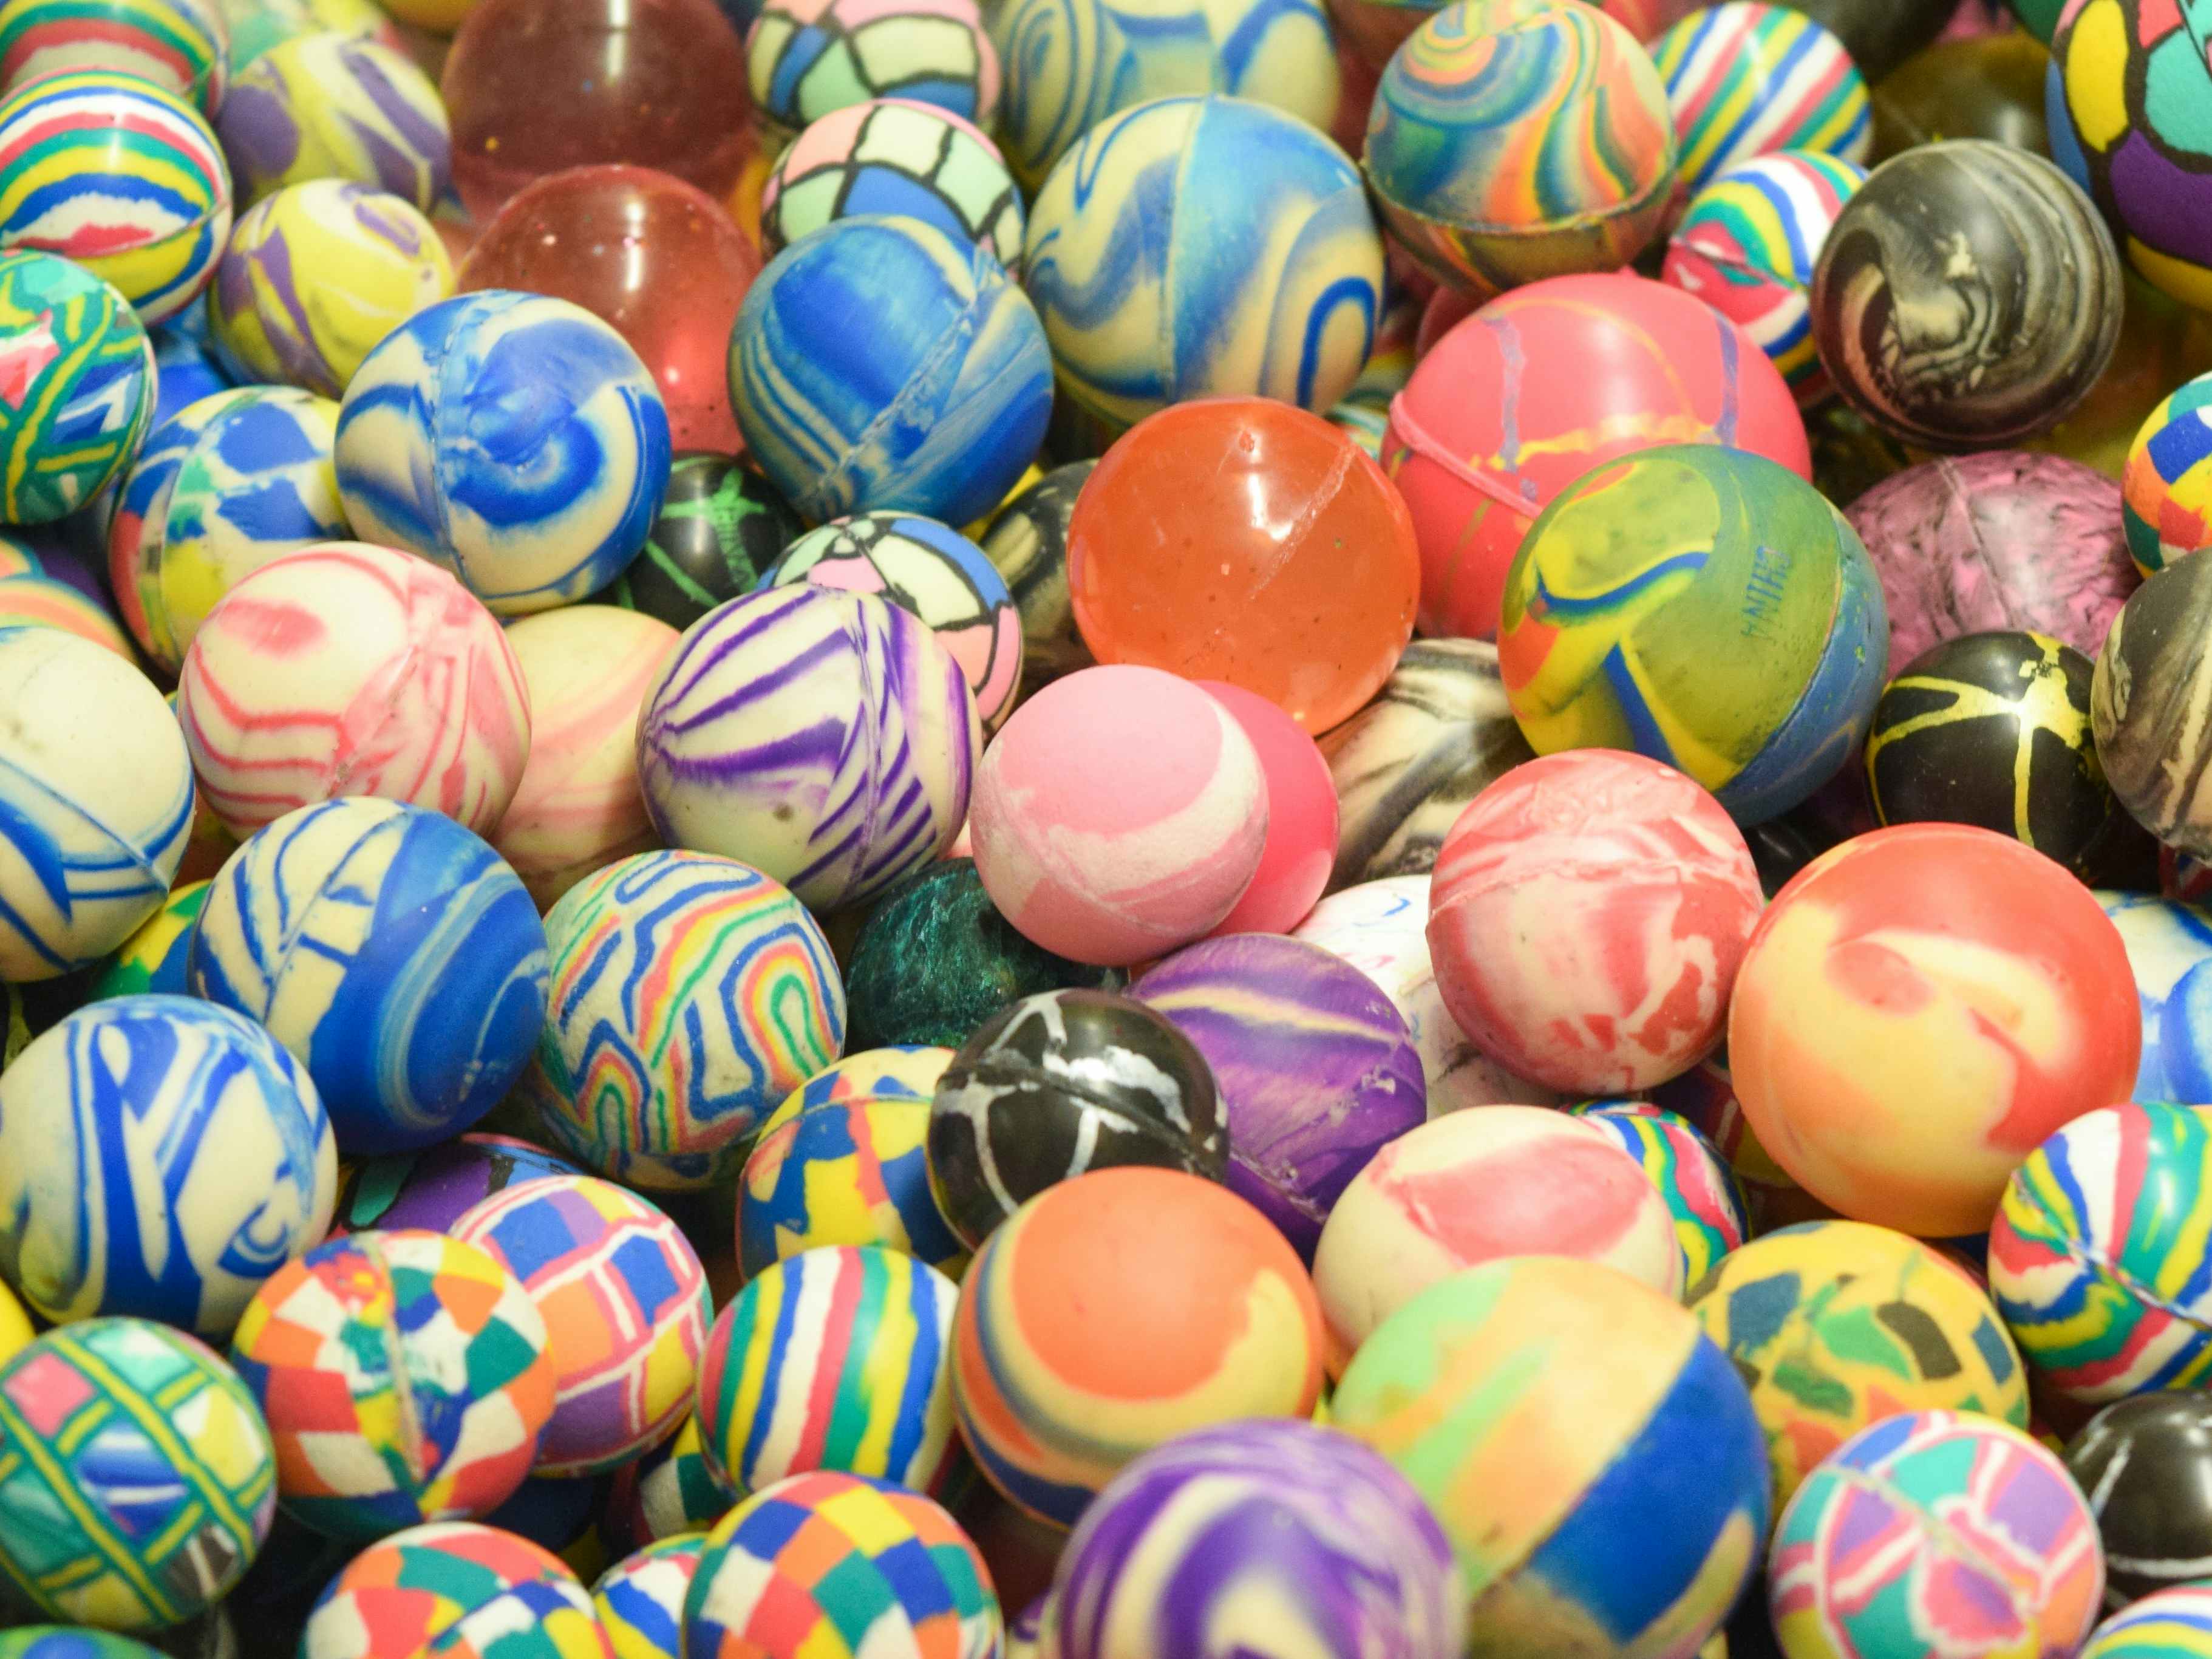 A close up on a huge pile of colorful bouncy balls.